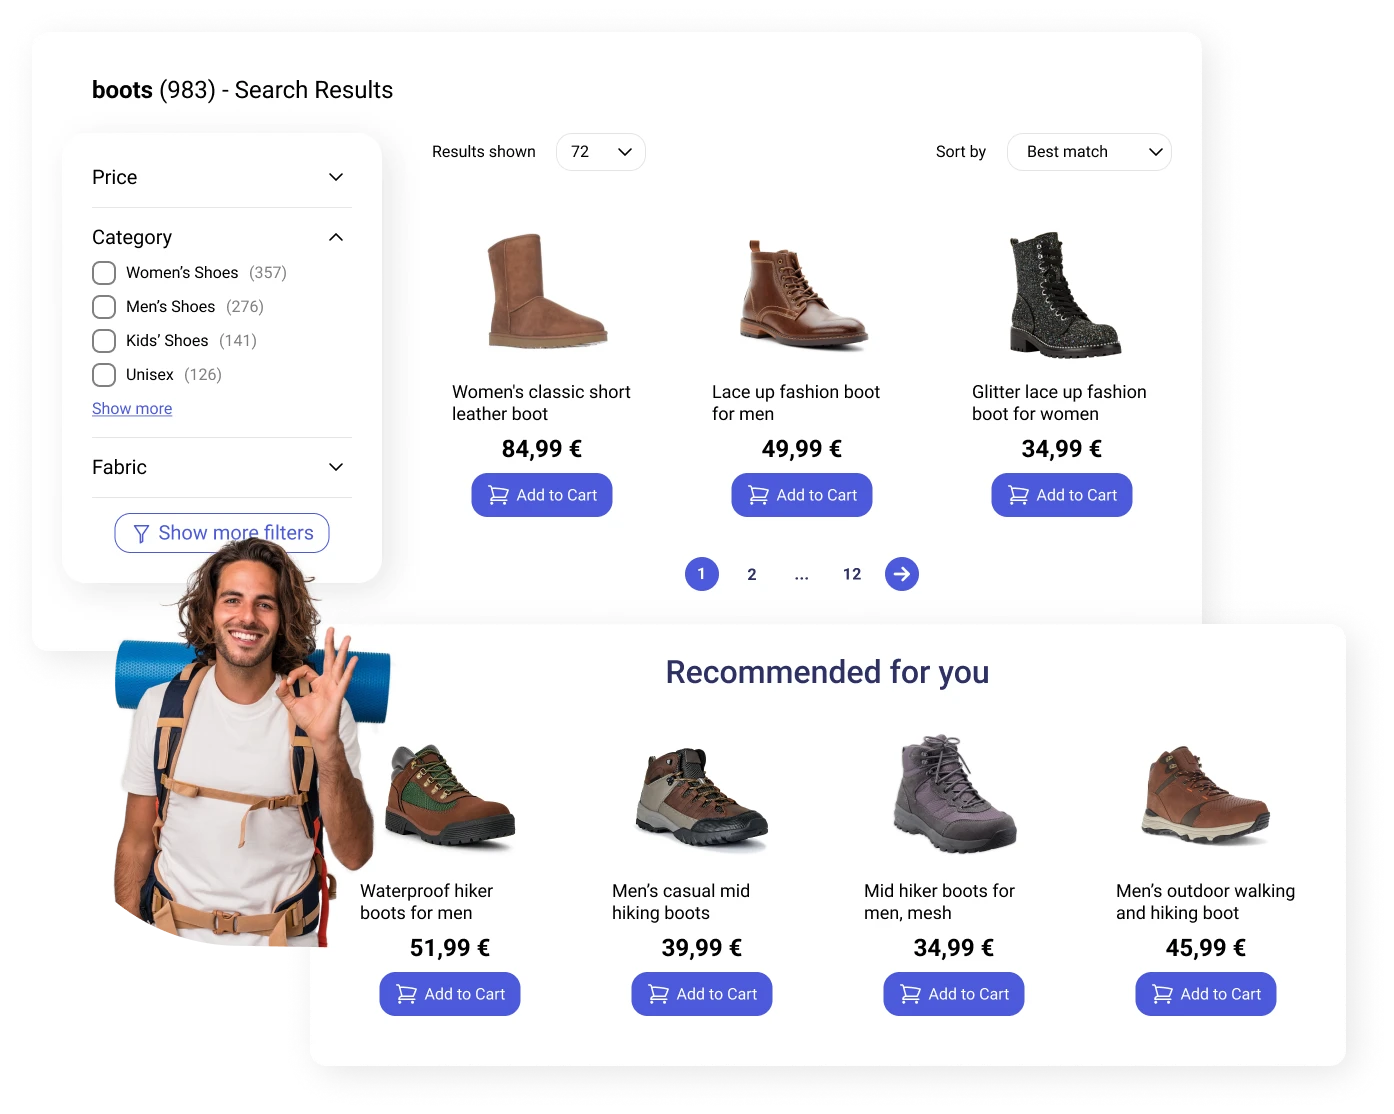 Ecommerce website showcasing personalized recommendation feature by showing offerings tailored to user preferences